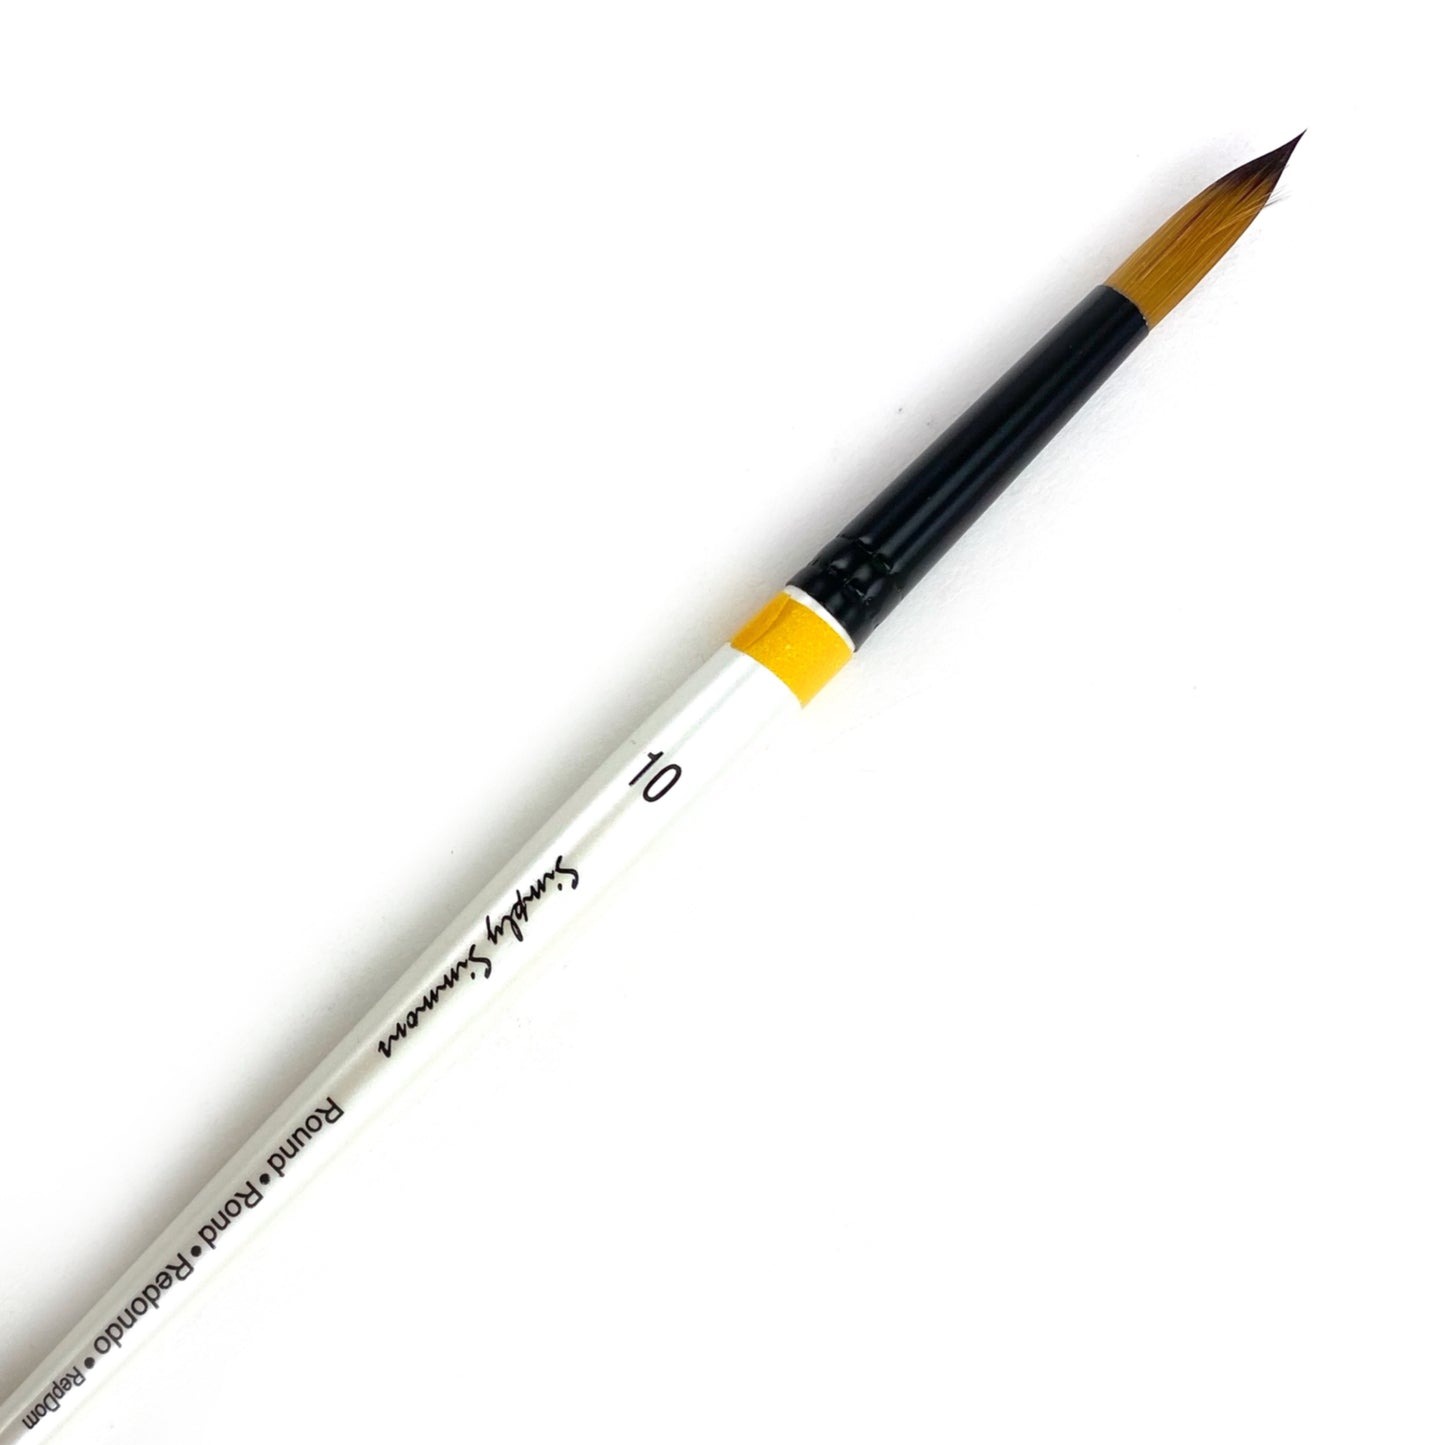 Simply Simmons All-Media Brush - Short Handle - Round / #10 by Robert Simmons - K. A. Artist Shop